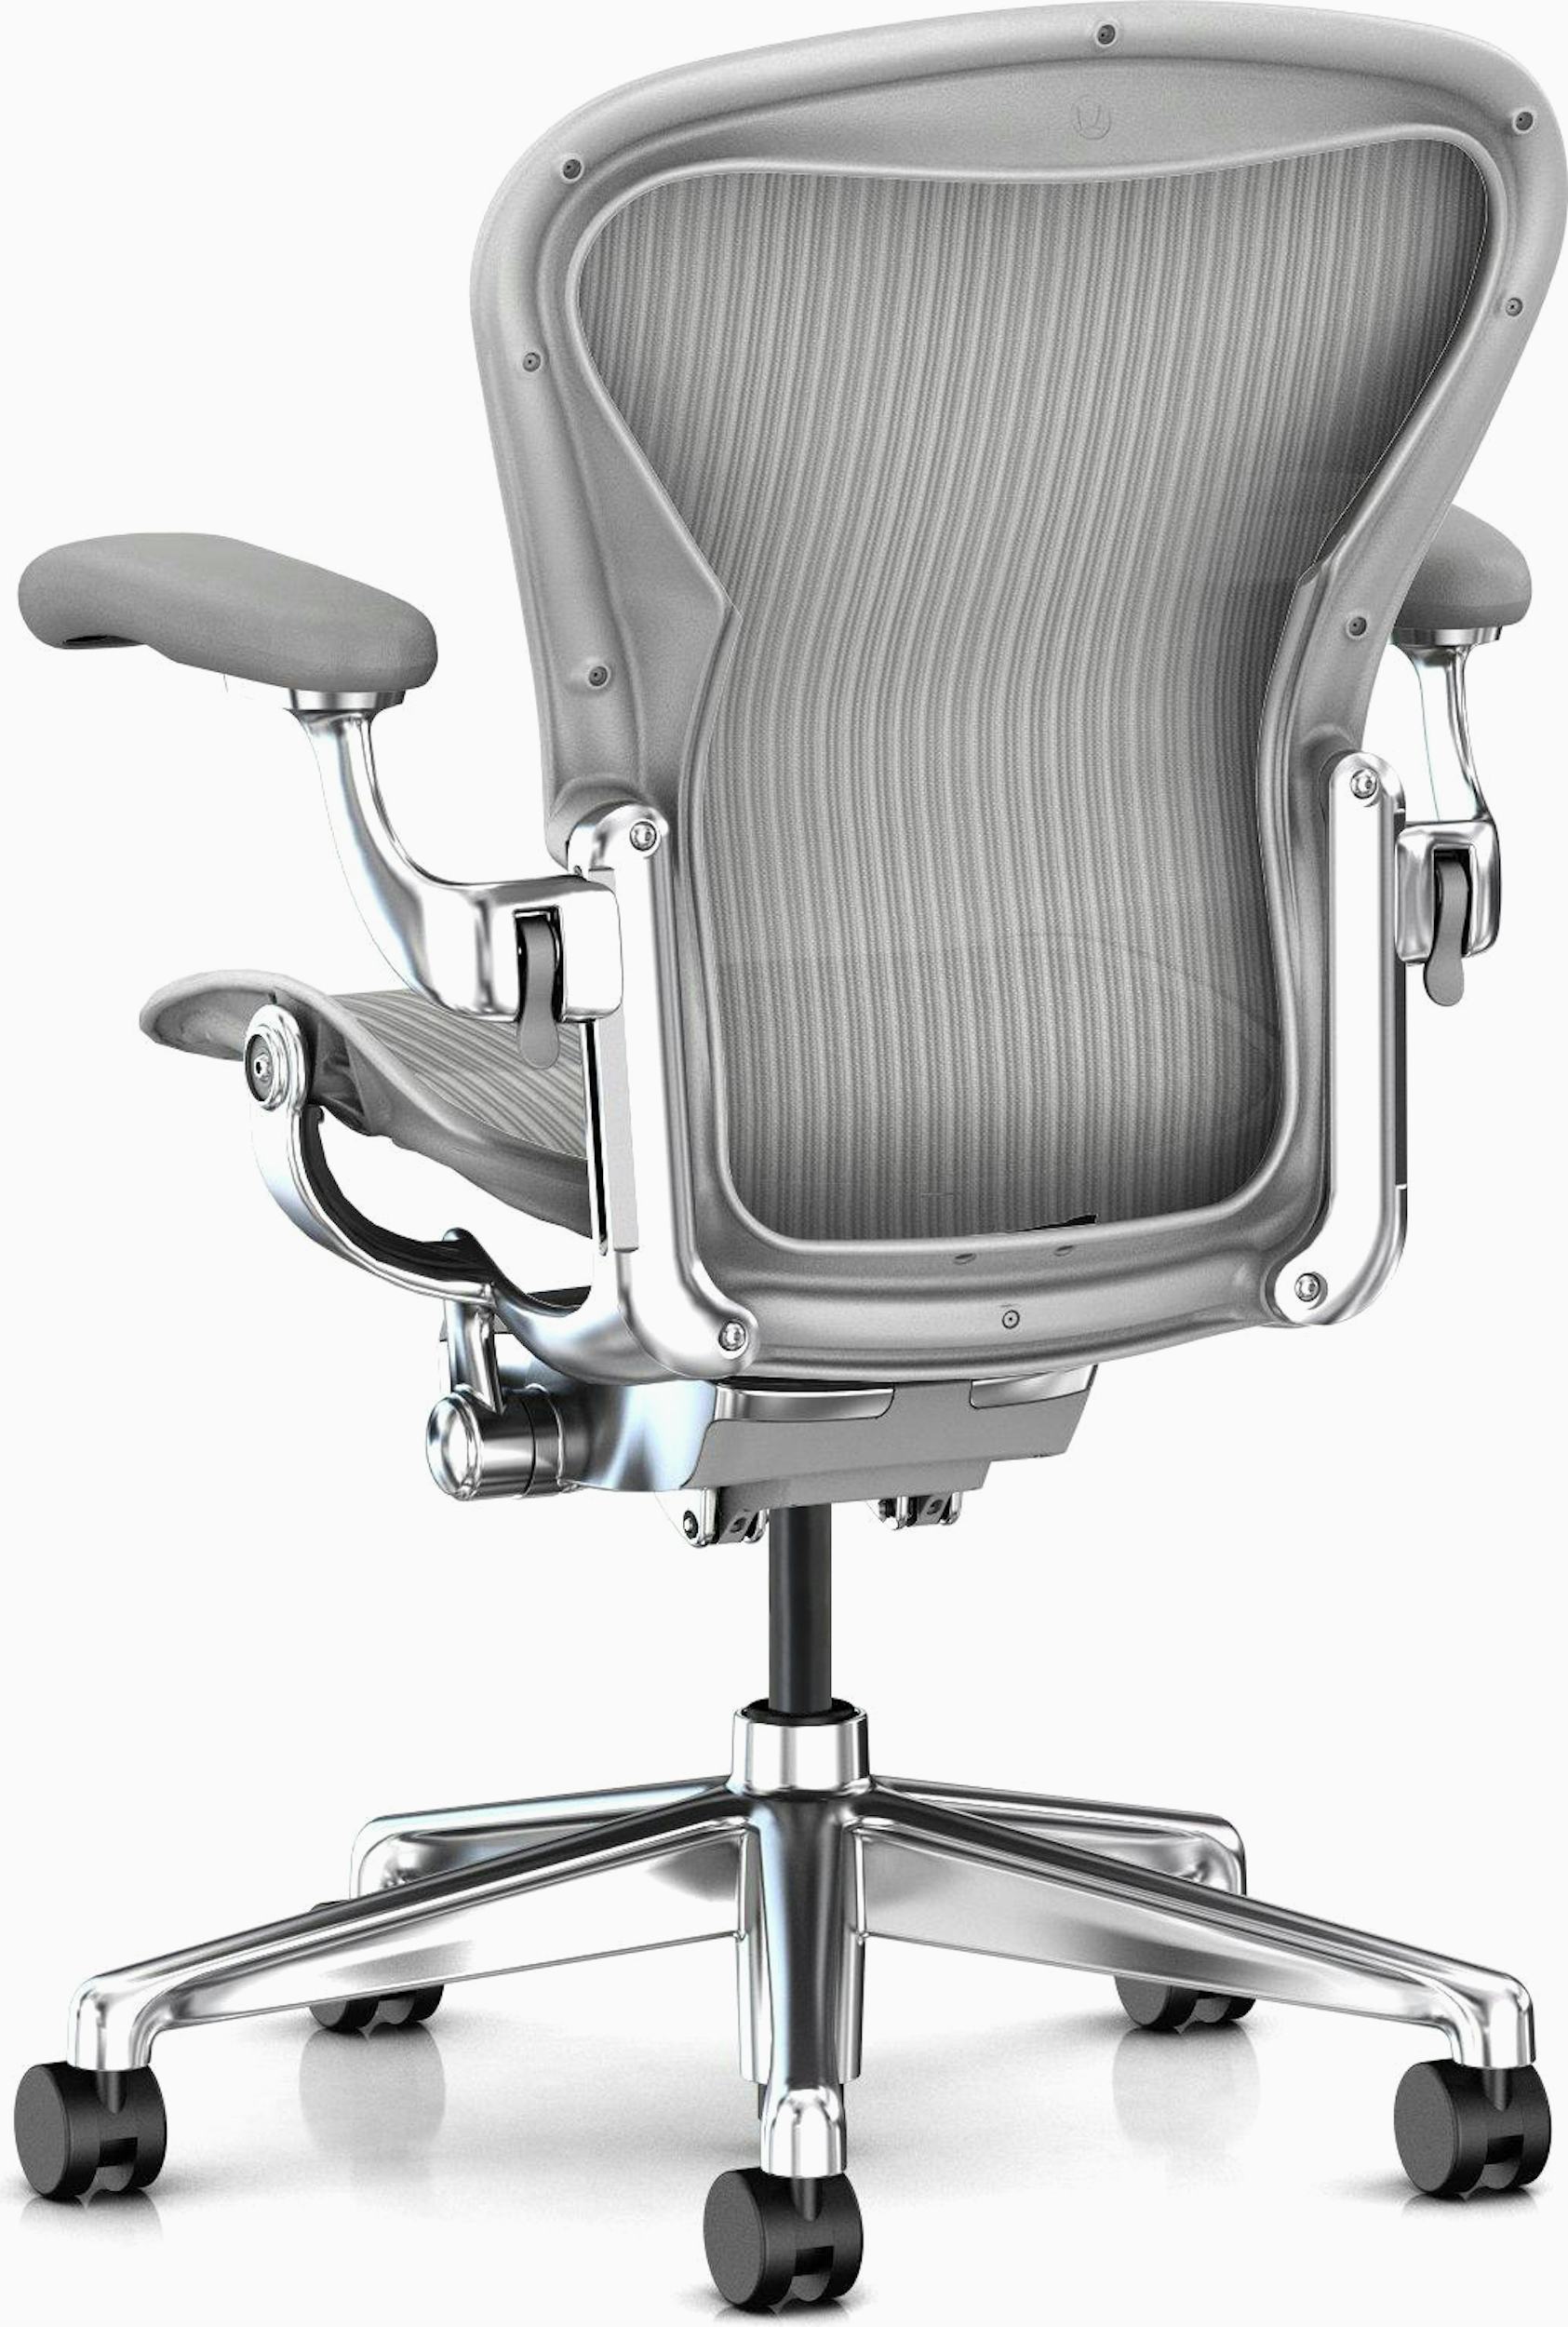 Aeron Office Chair* Mineral/Polished